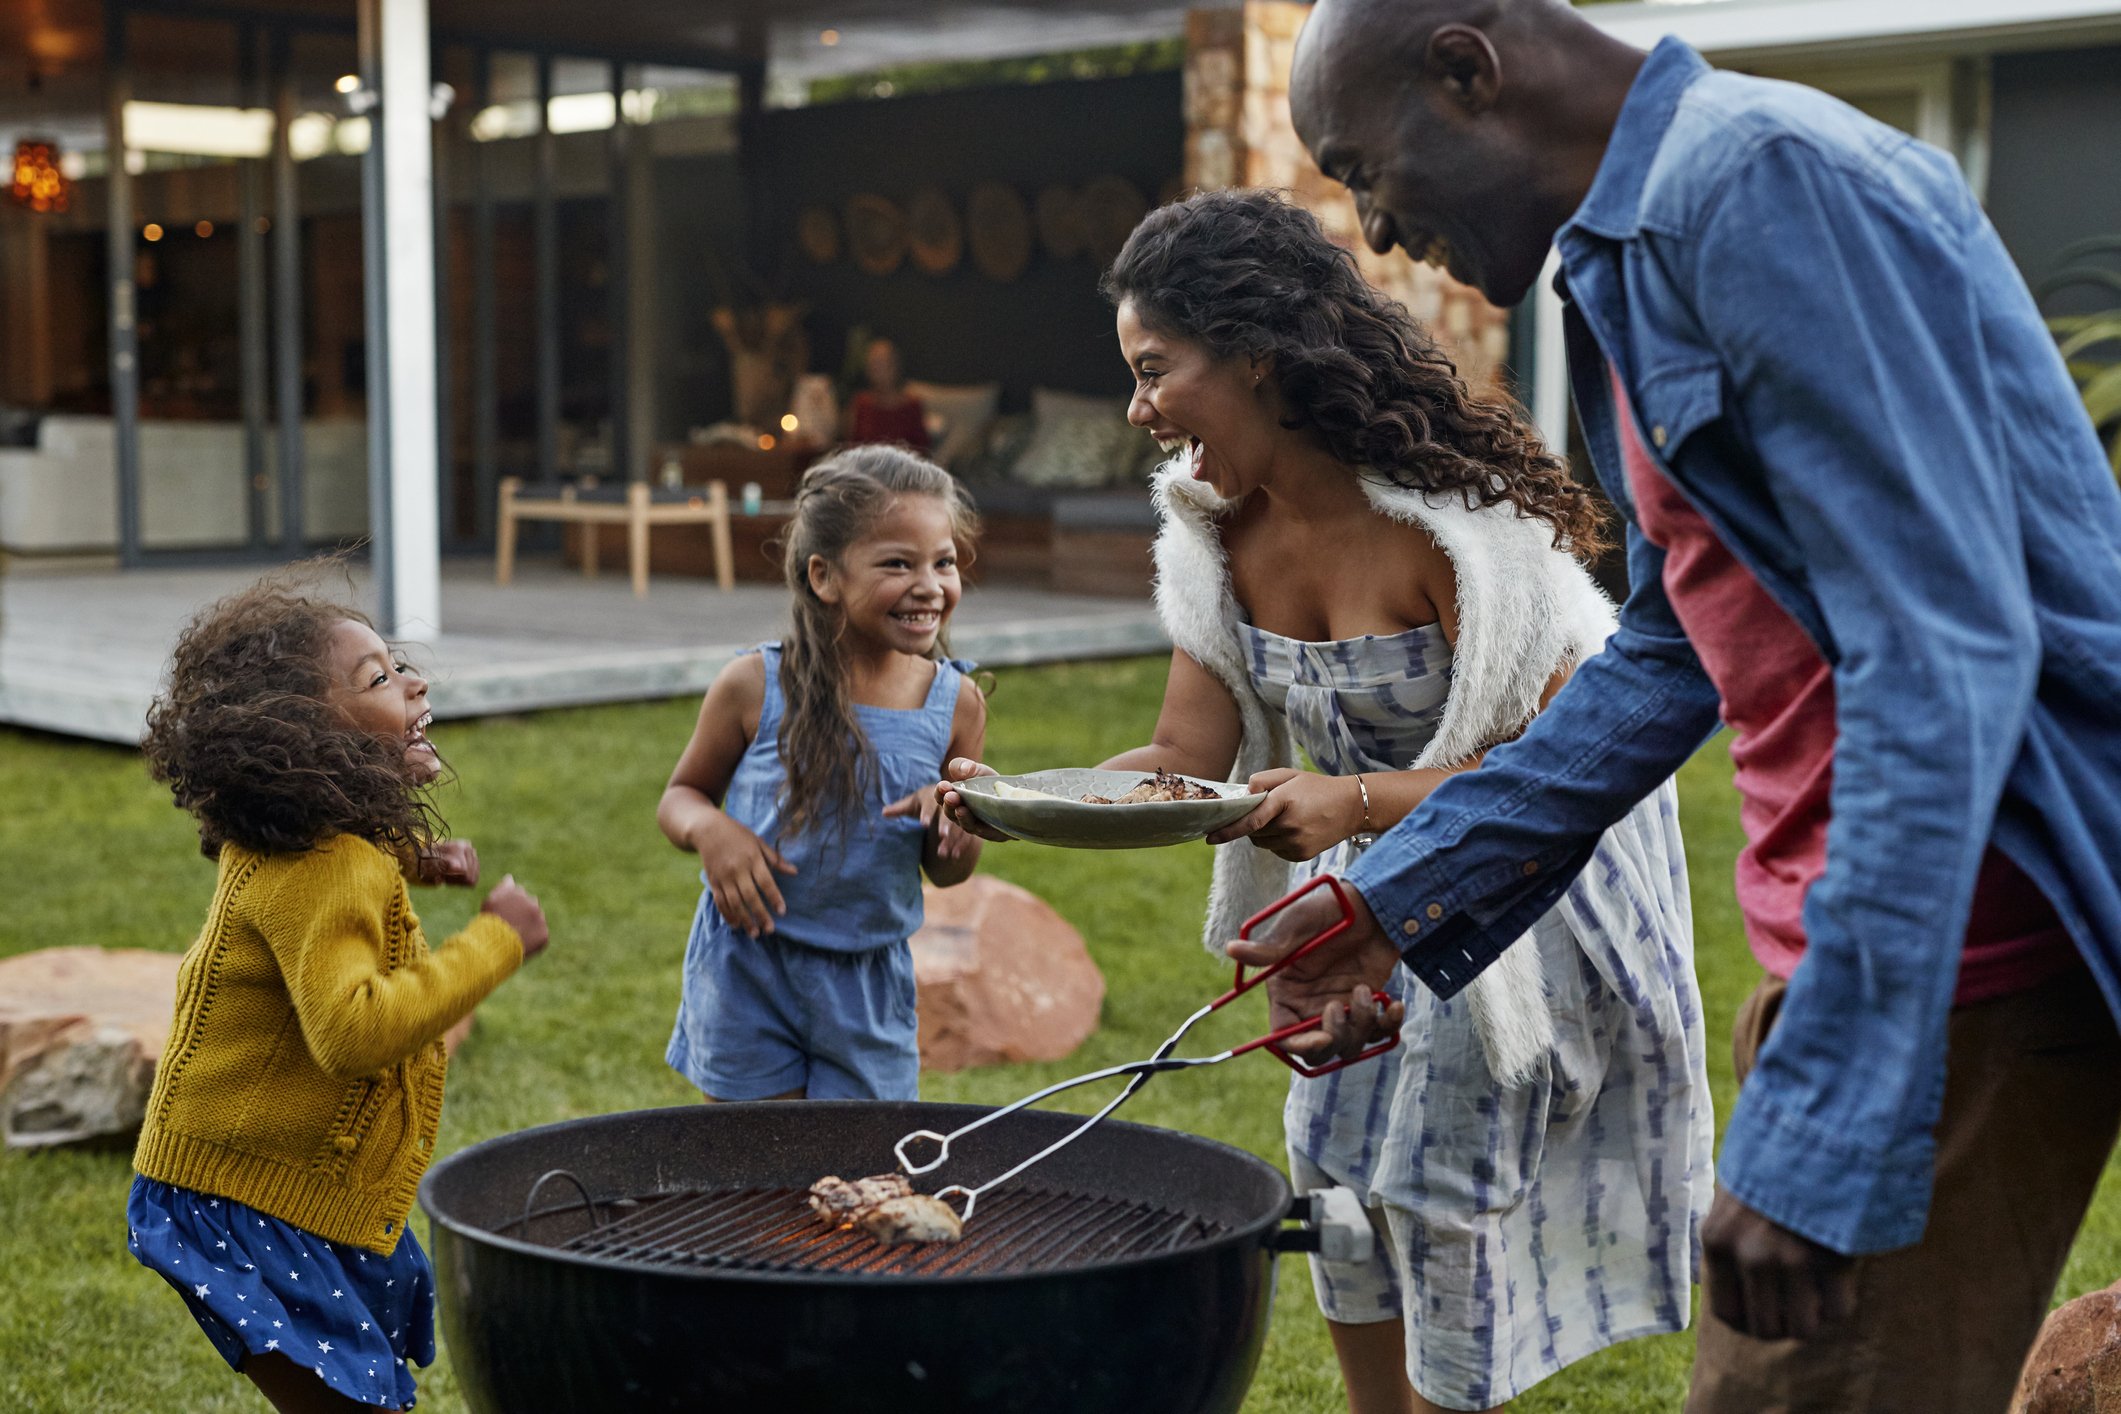 Family of 4 enjoying grilling outside their home